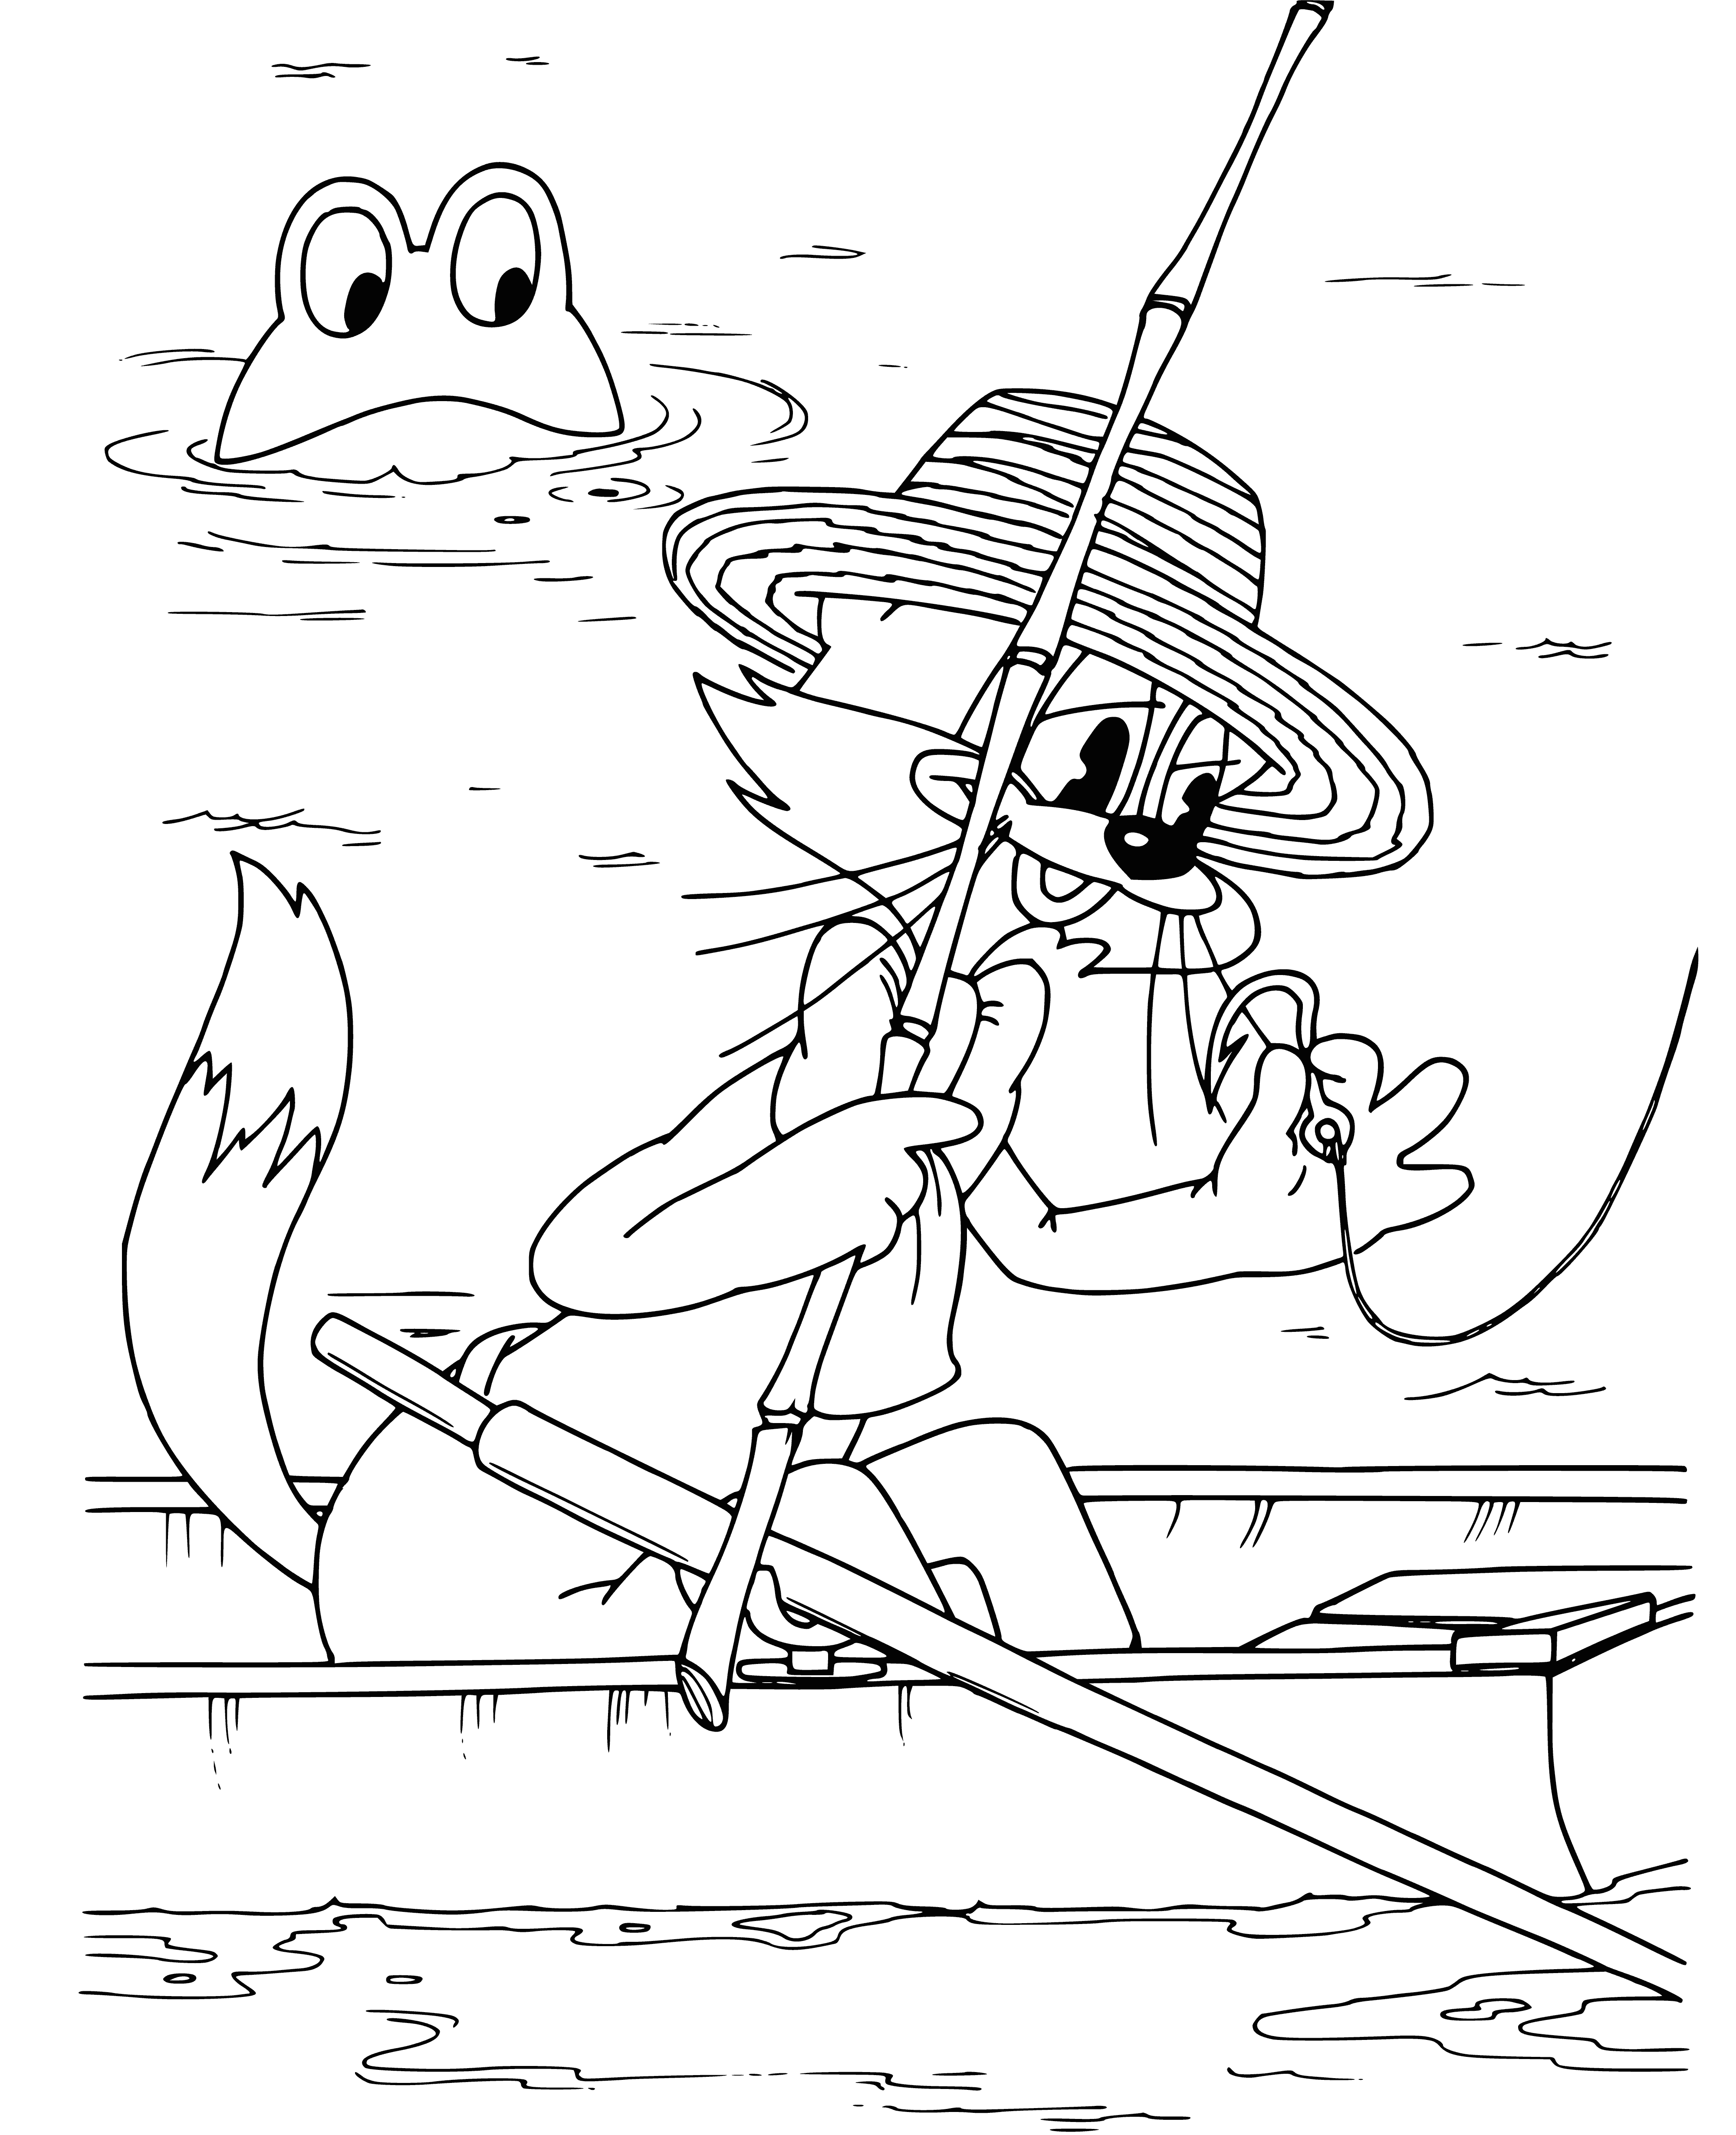 coloring page: Leopold the Cat is having a great time adventuring, climbing up a tree and leaping through the air.